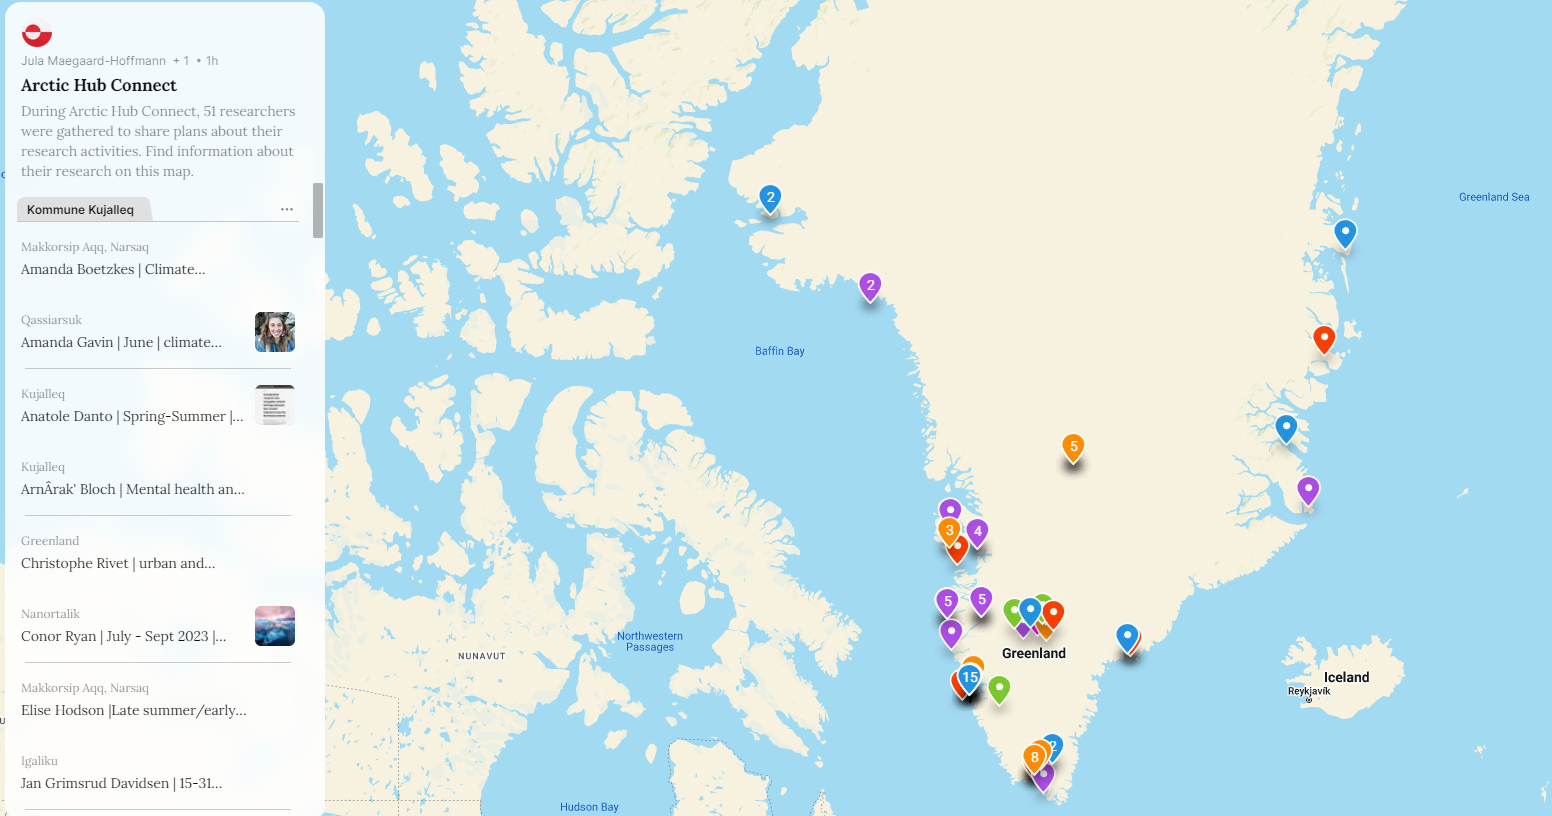 Photo 2 - Map of Arctic Hub Connect - Most regions of Greenland were represented when the researchers at Arctic Hub Connect were sharing their research projects.